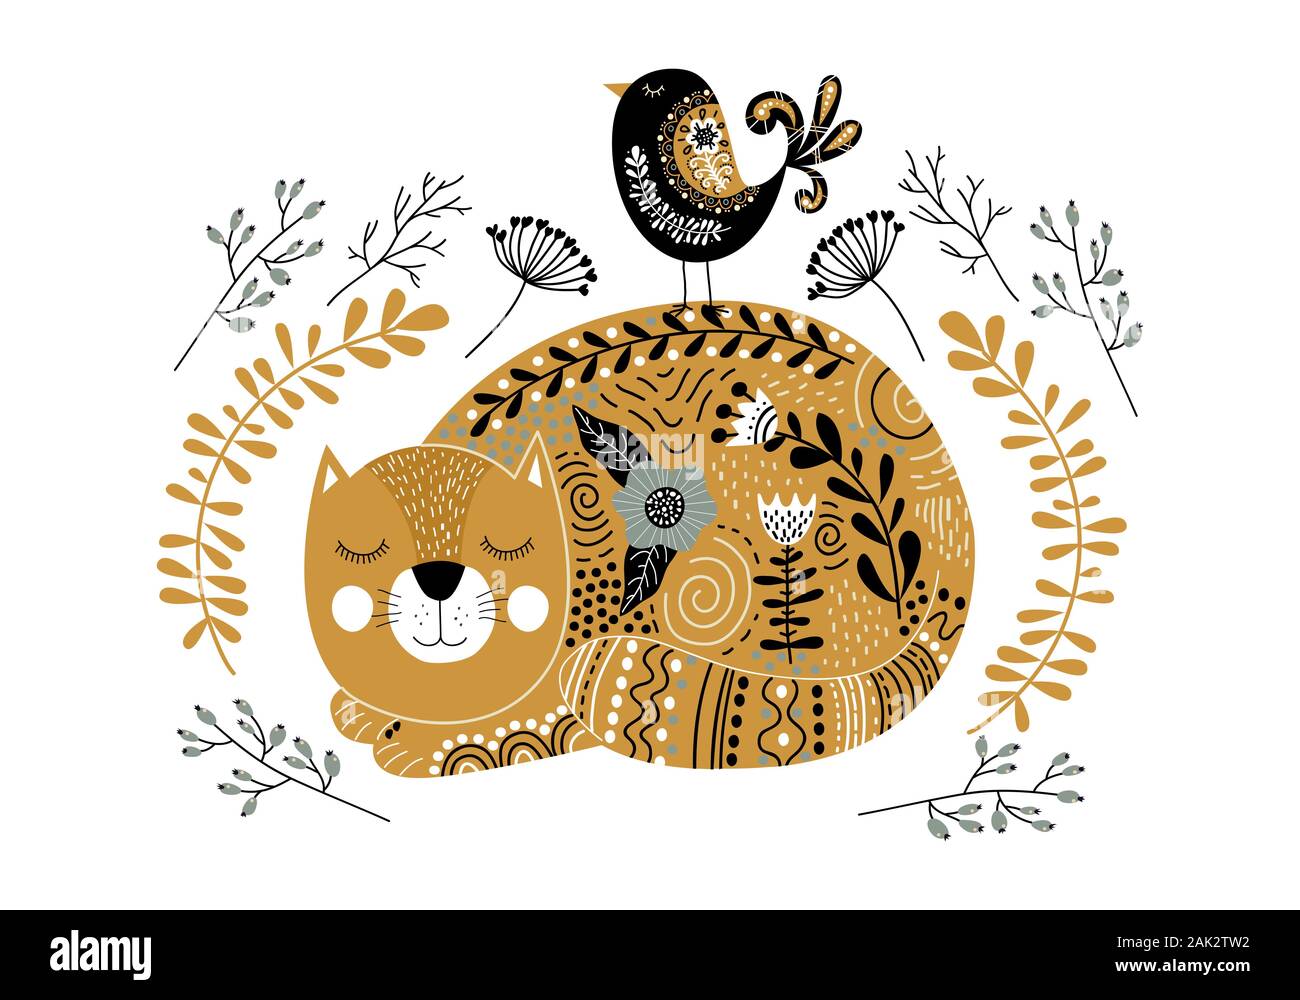 Art vector monochrome illustration with cute cat, bird and flowers in scandinavian style on a white background. Stock Vector